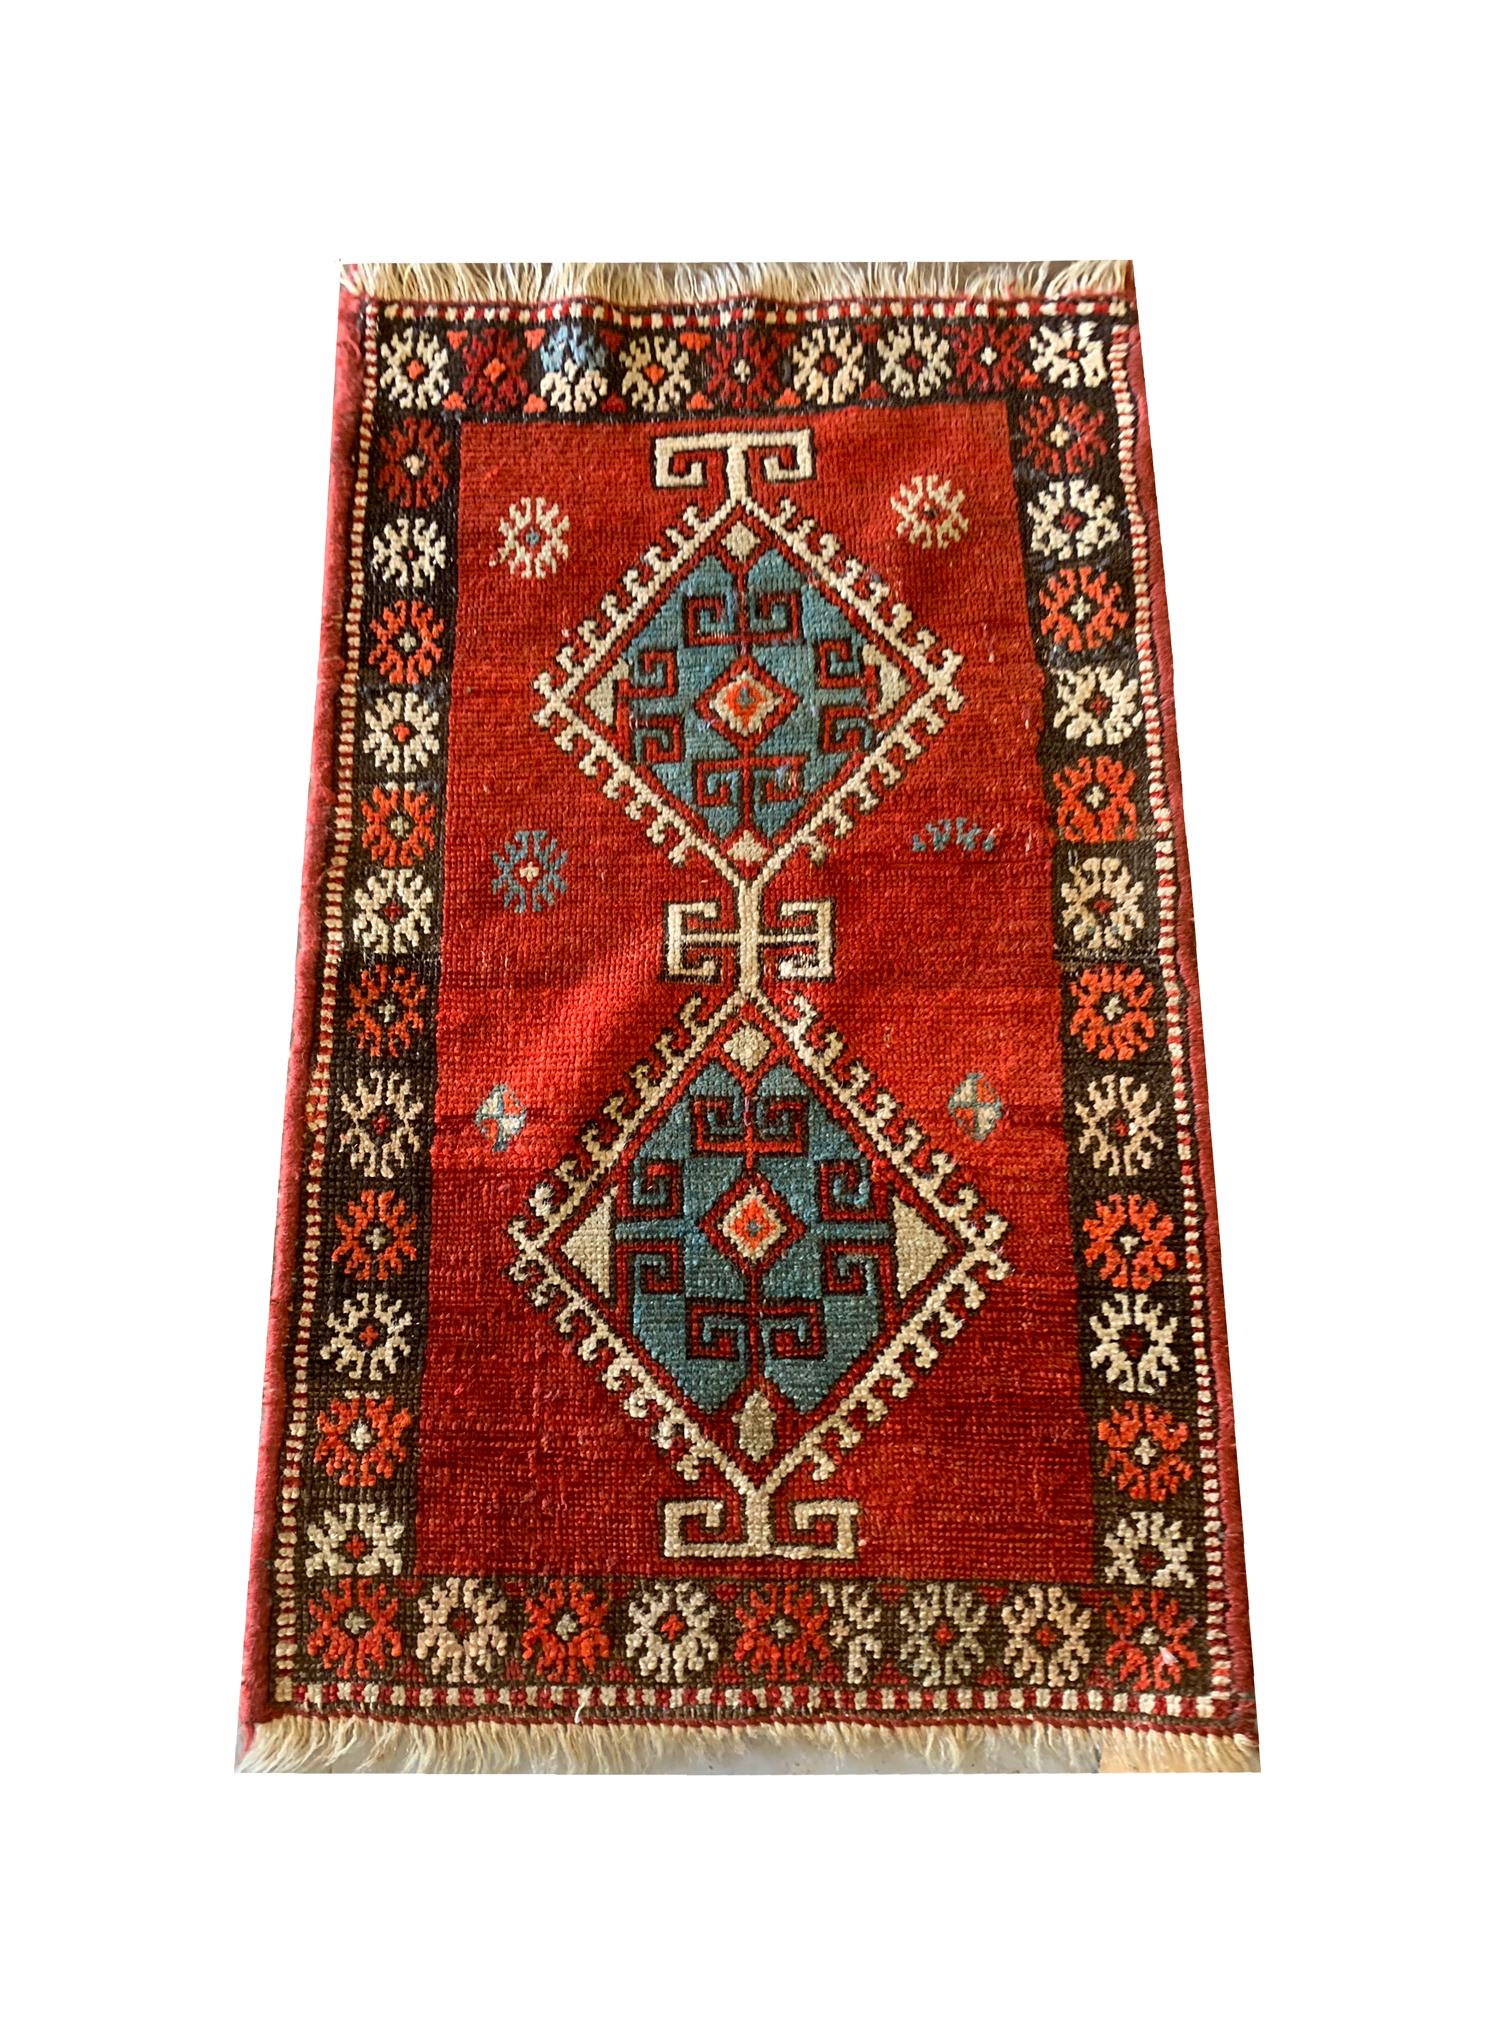 This fine red small wool rug features a tribal design with central diamond medallions woven on a red field in accents of beige and blue. The bold design and colour palette make this a great accent piece. The craftsmanship is evident in both the